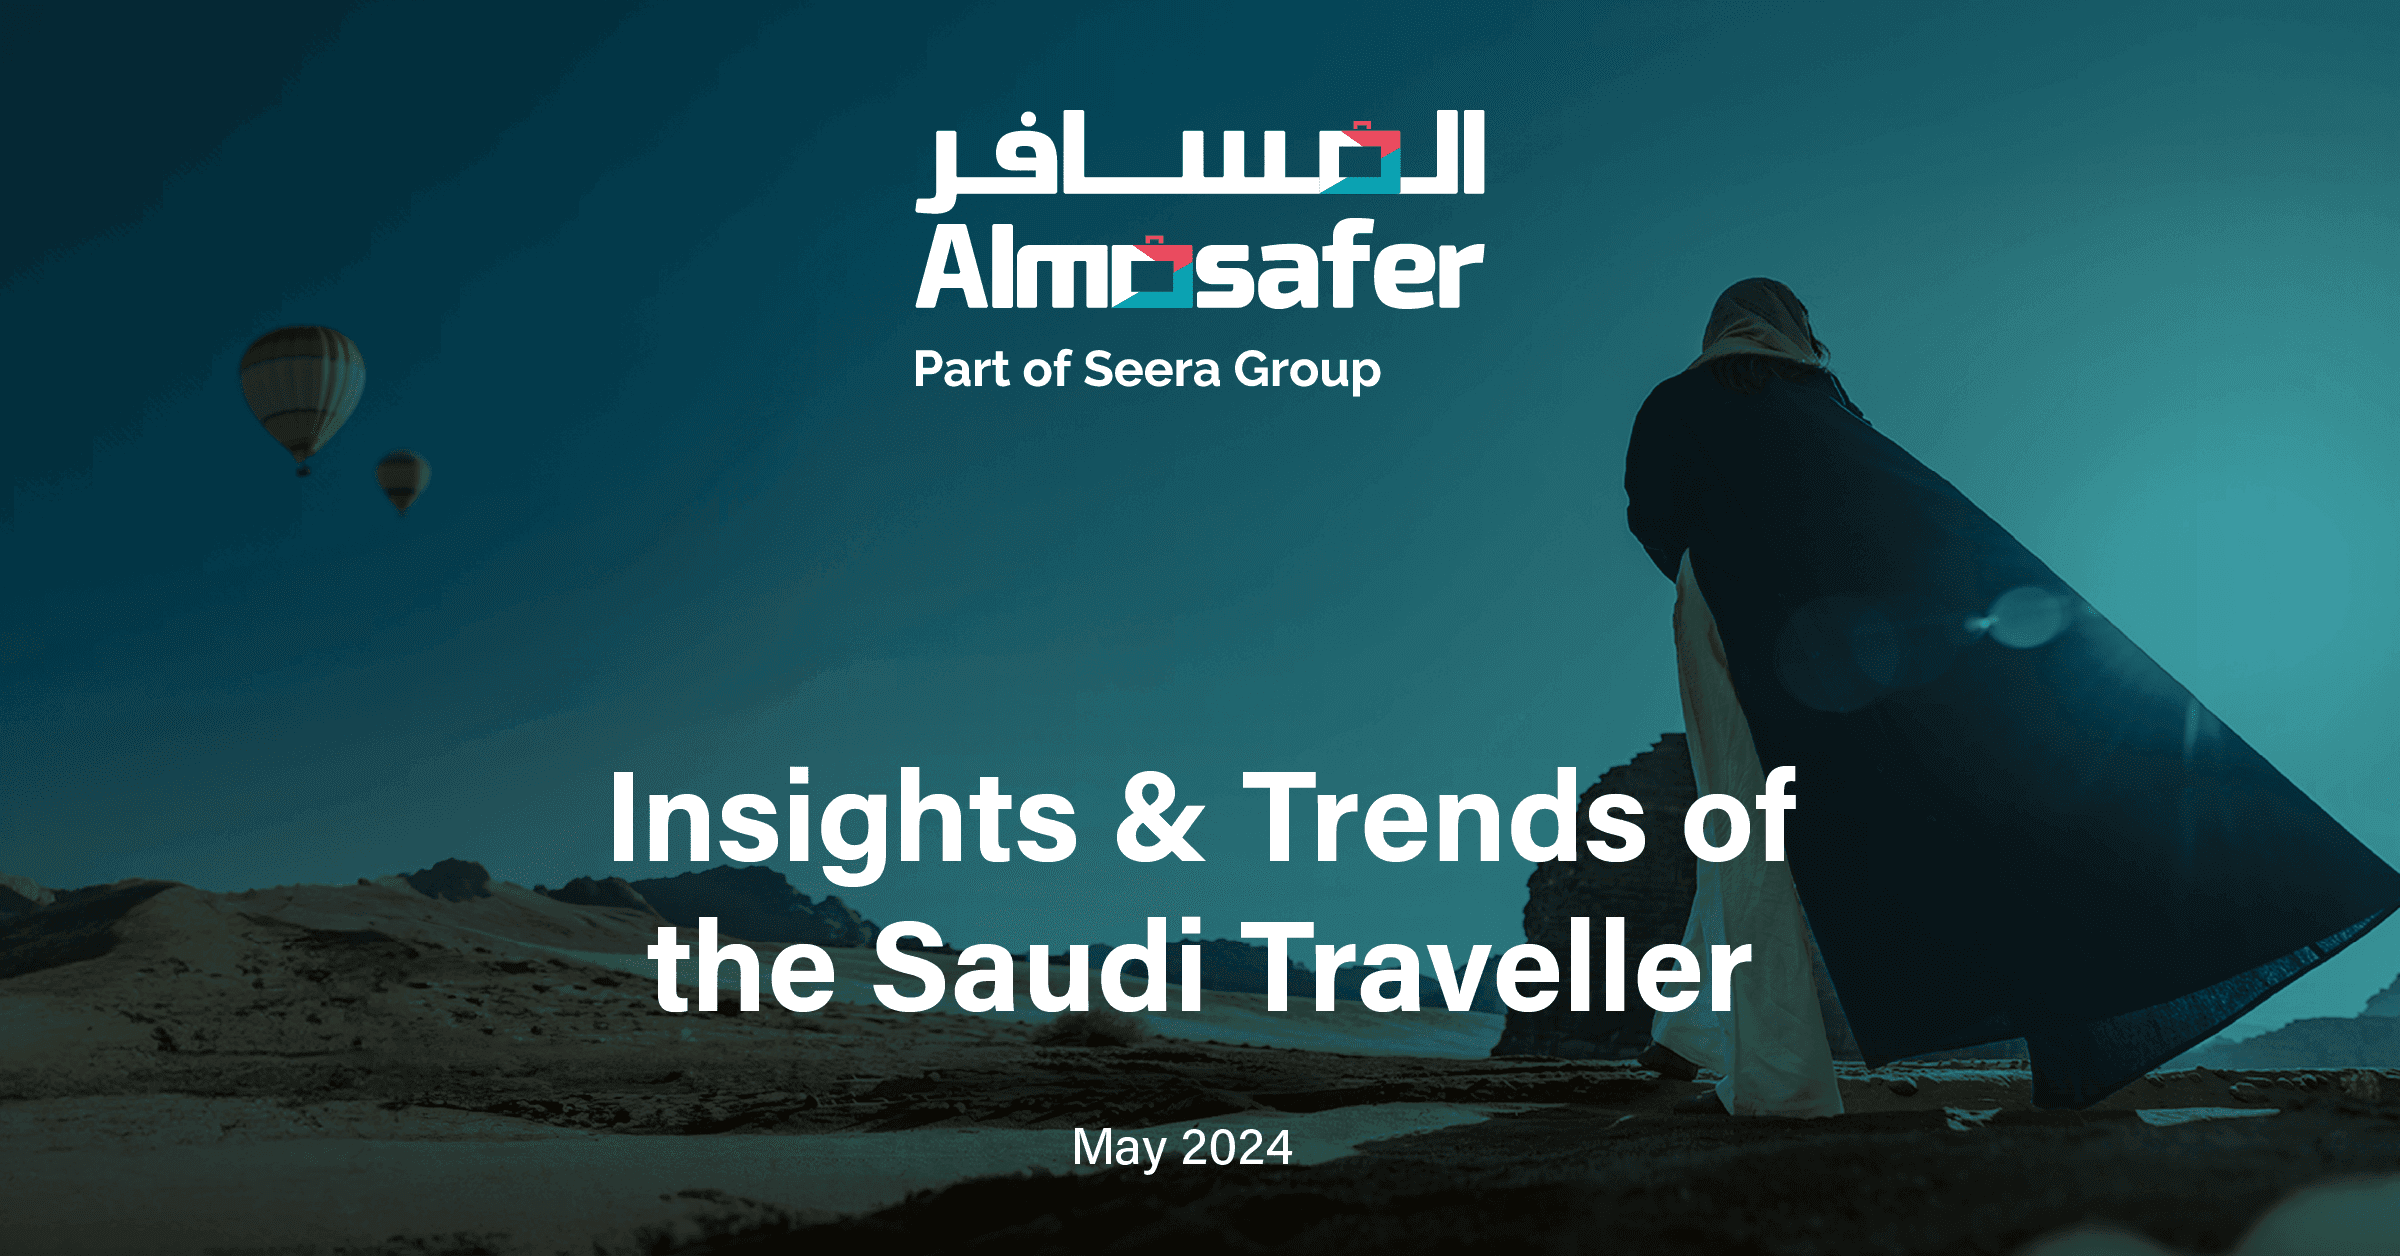 Saudi Travellers Making the Most of Trips: Almosafer Report Unveils Domestic and International Travel Trends